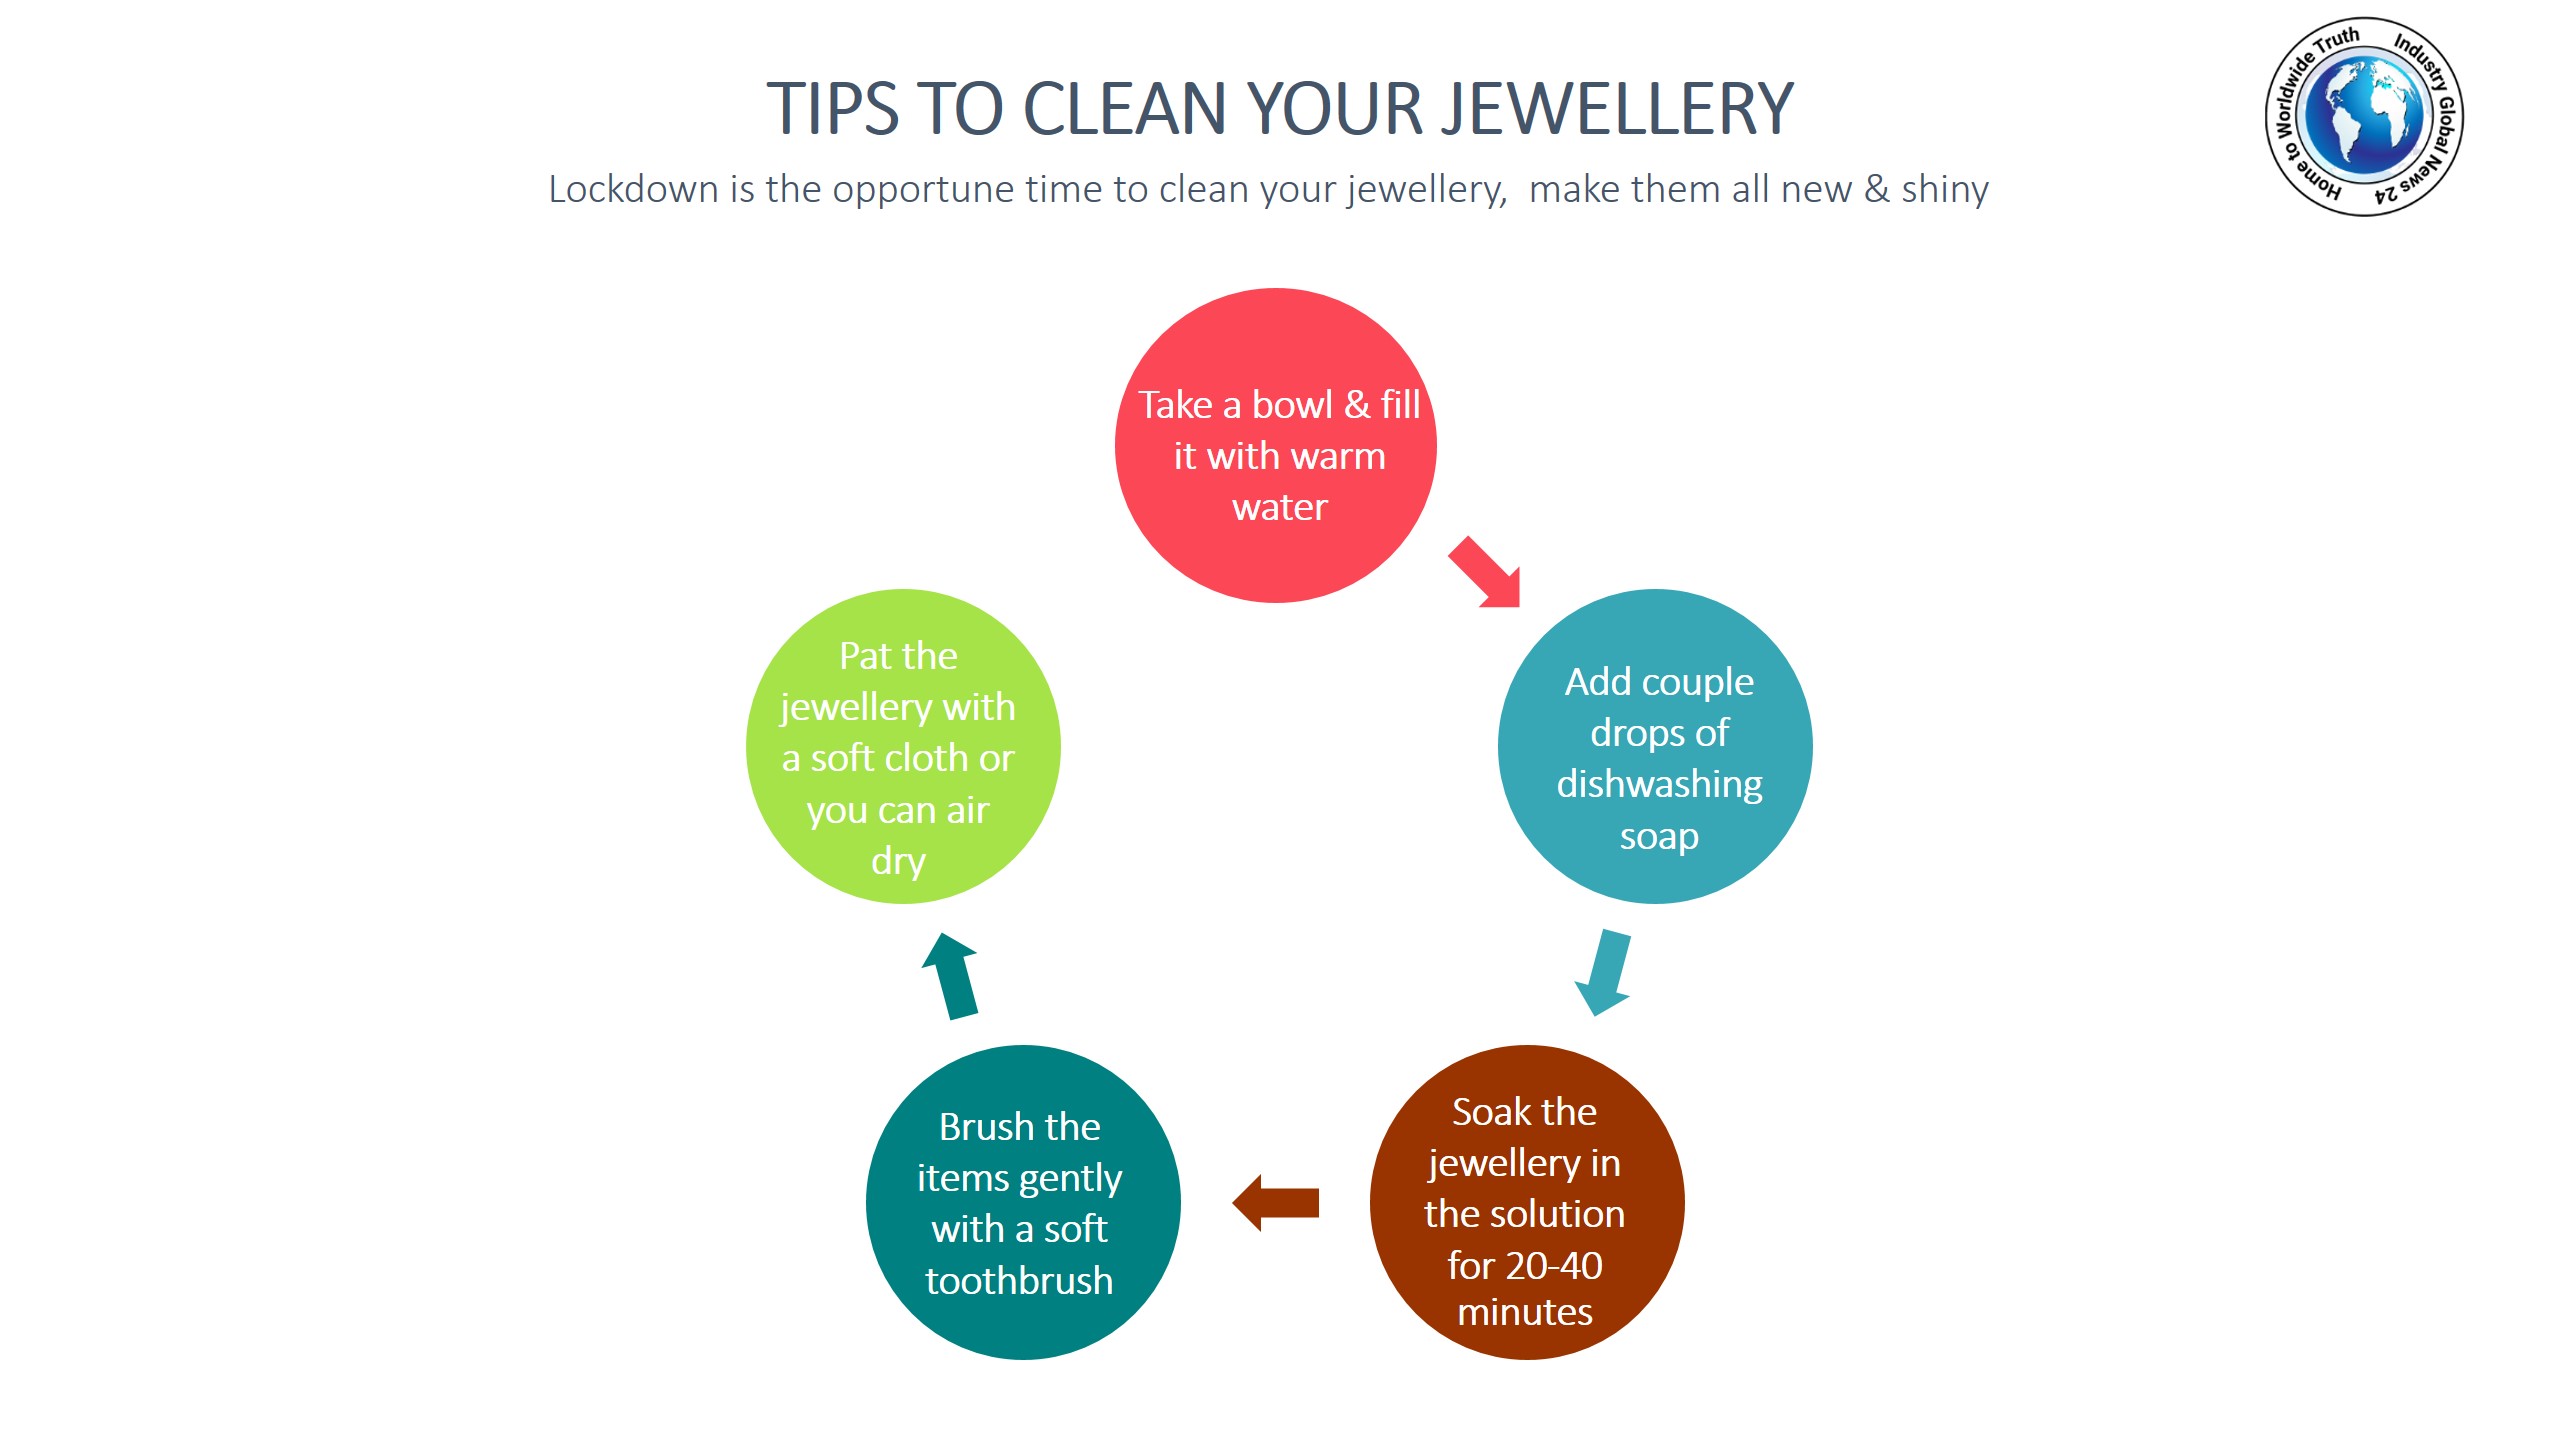 Tips to clean your jewellery